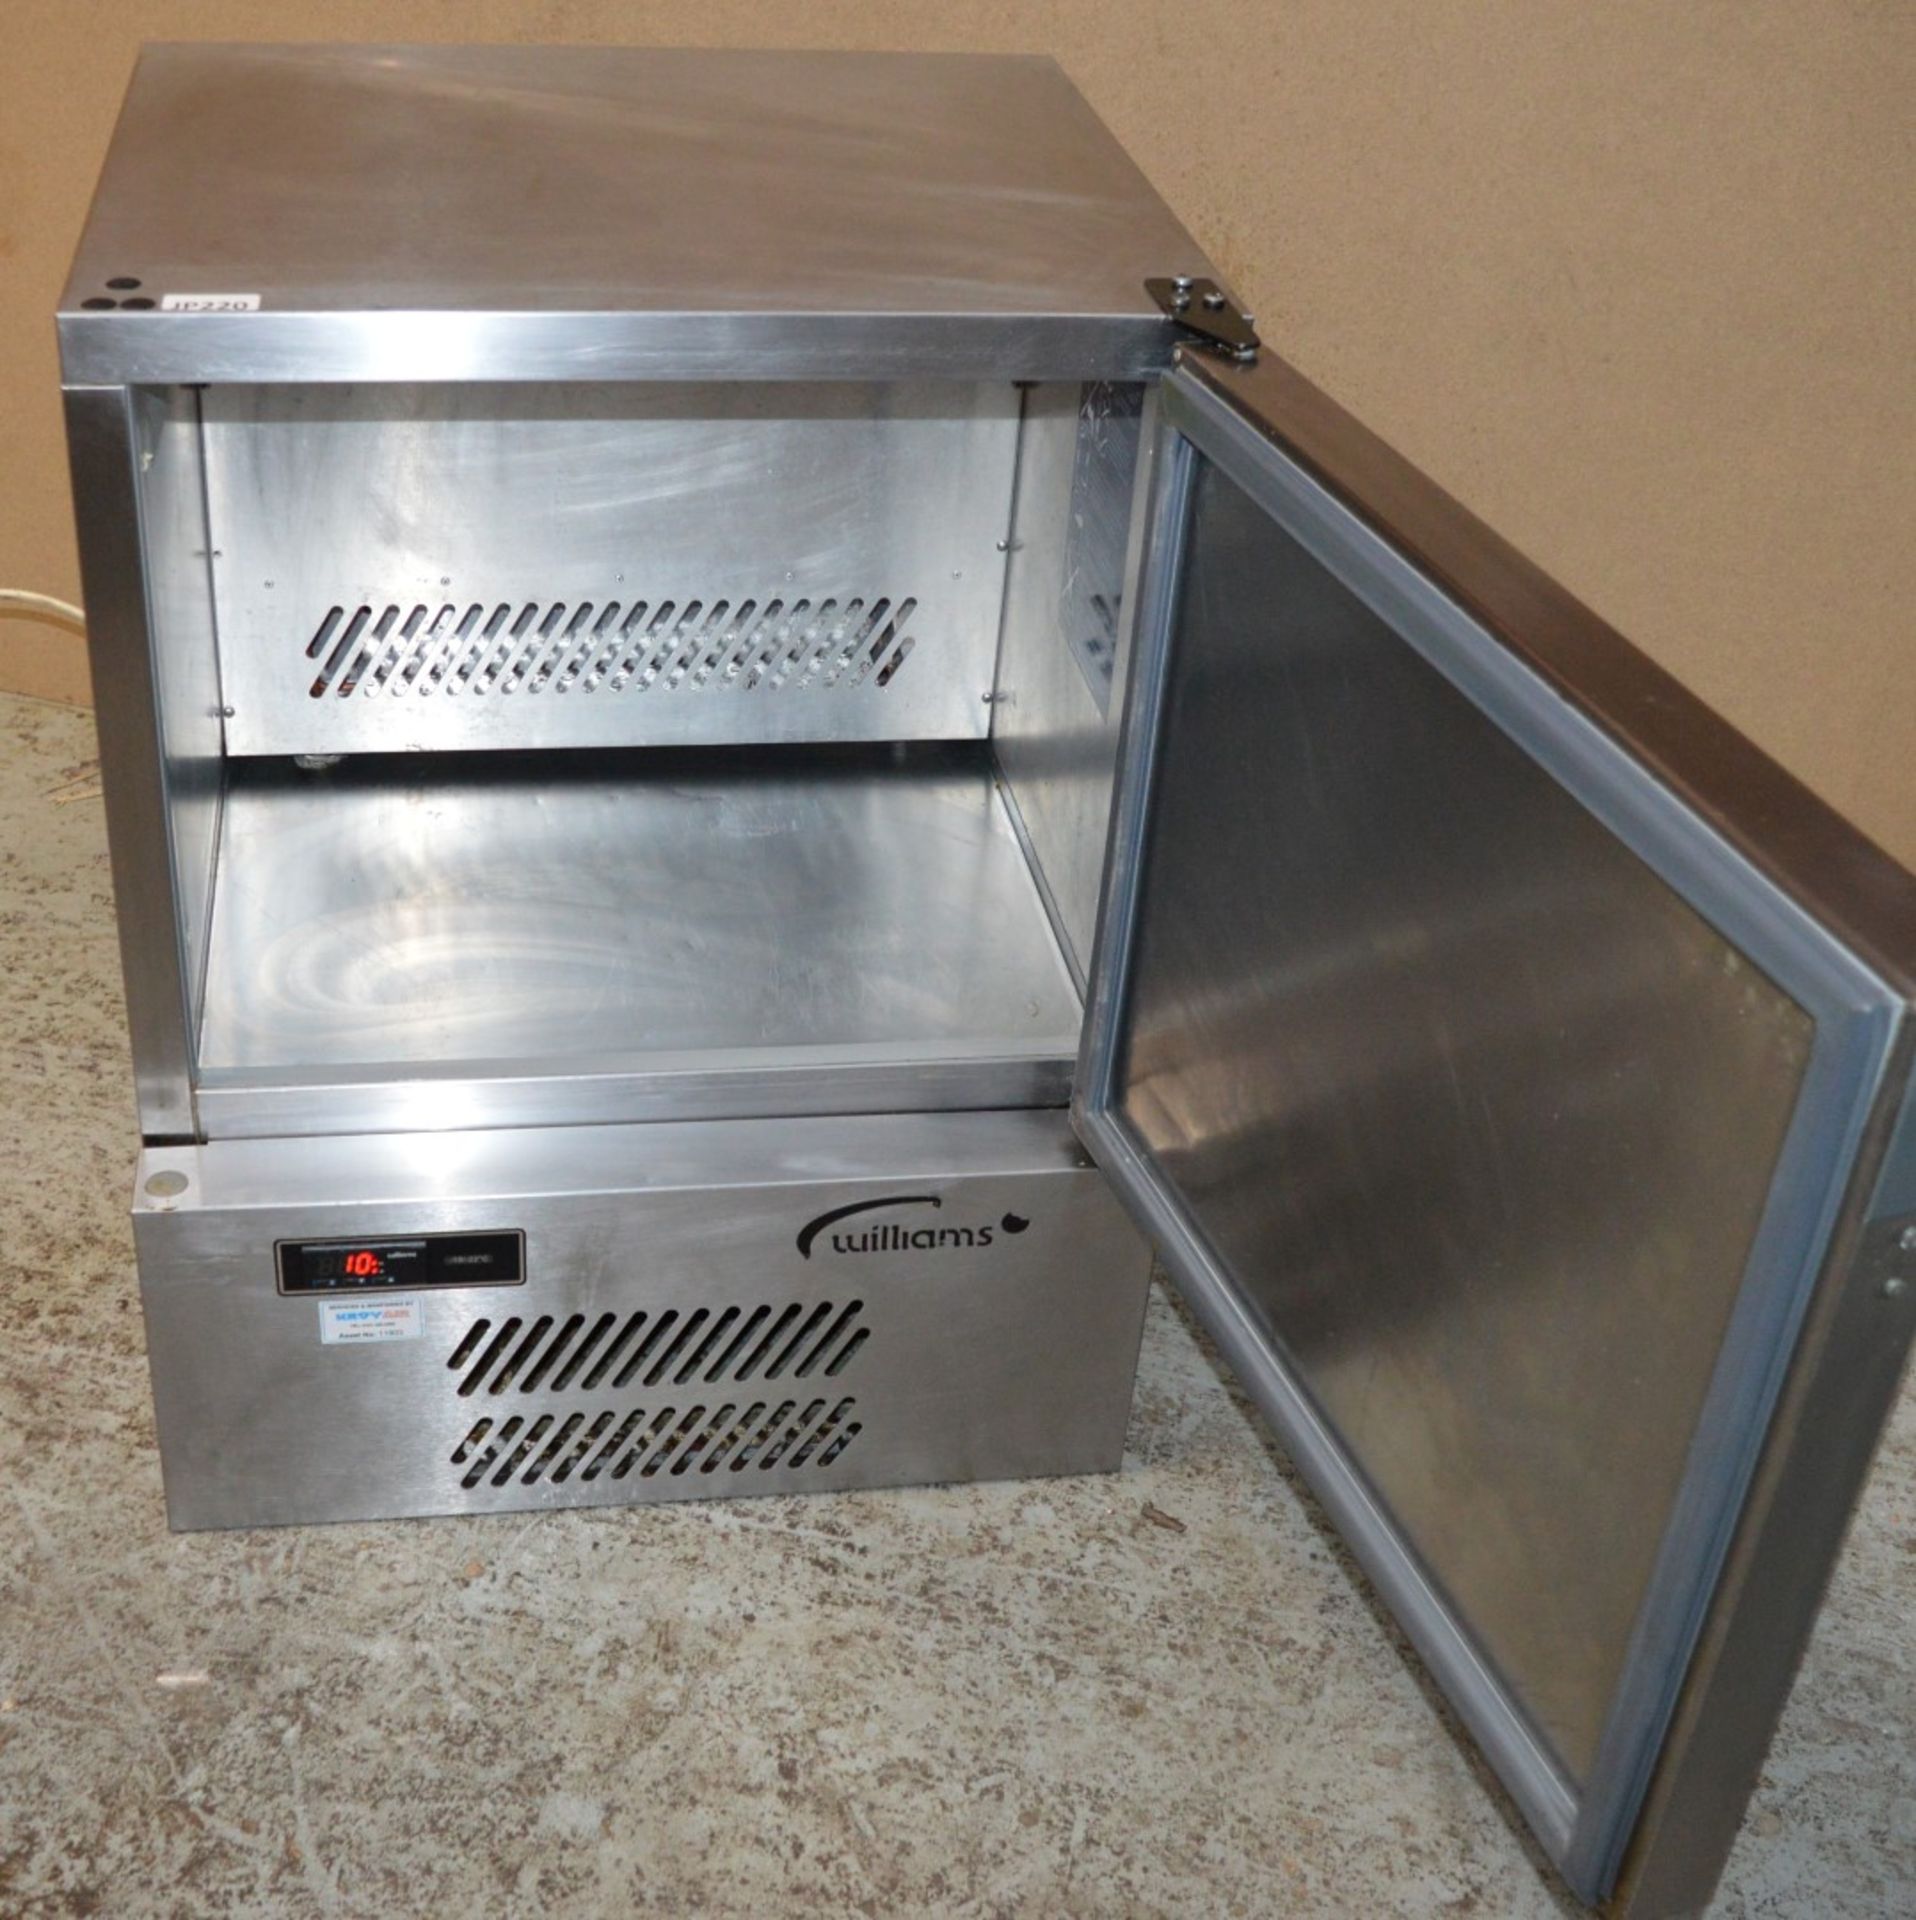 1 x Williams Single Door Under Counter Freezer - Model L5UC - Stainless Steel Finish - Suitable - Image 6 of 8